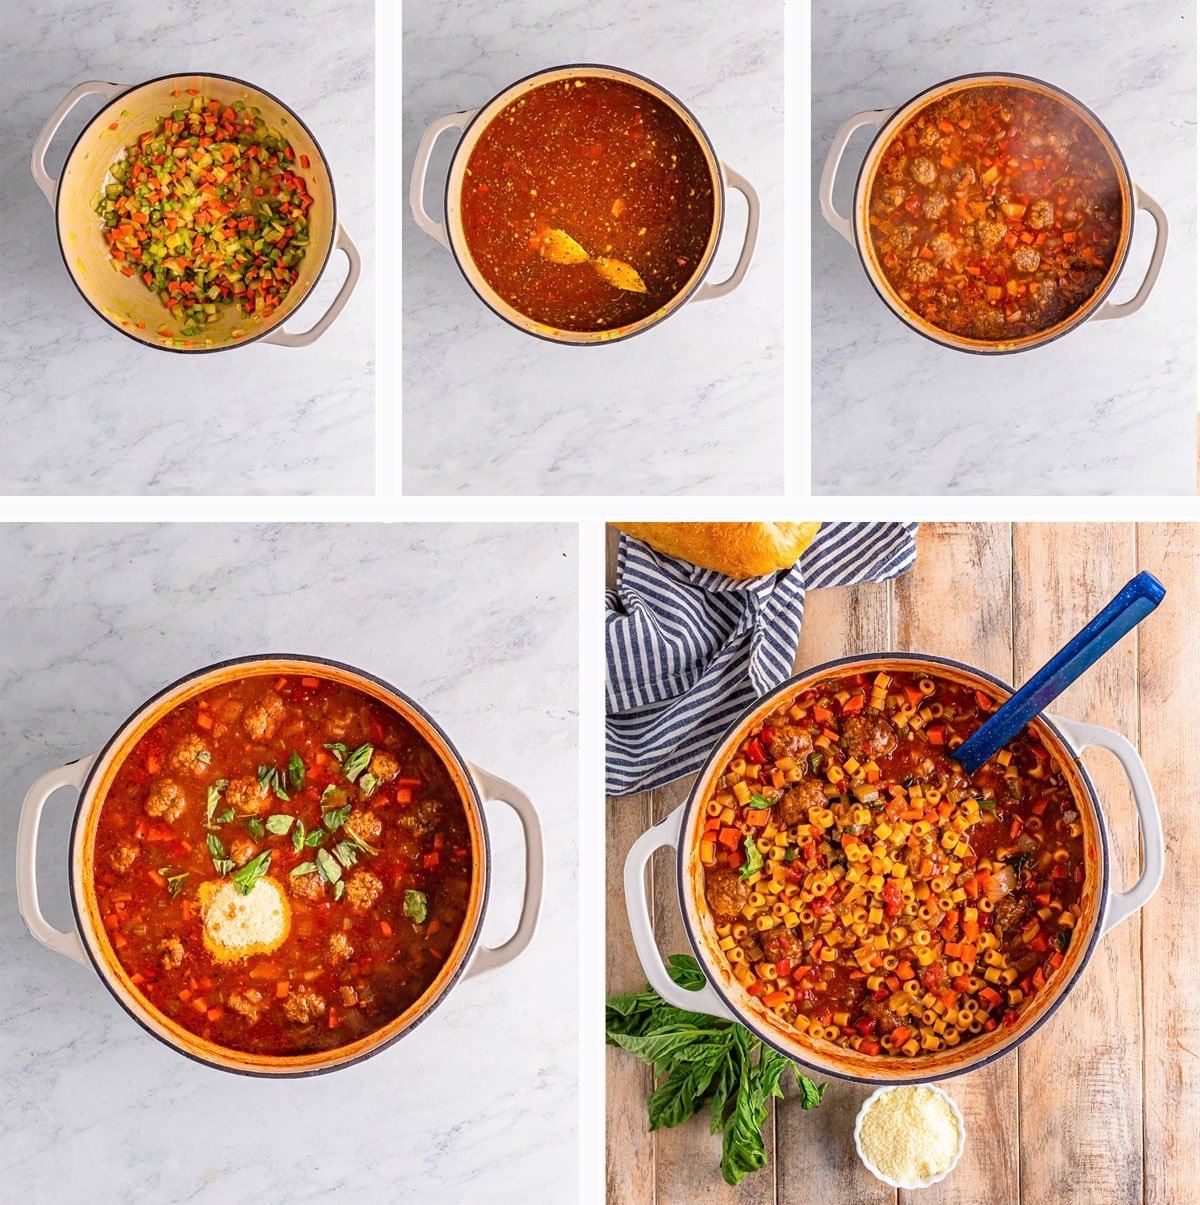 collage of images showing the final steps for making meatball soup recipe